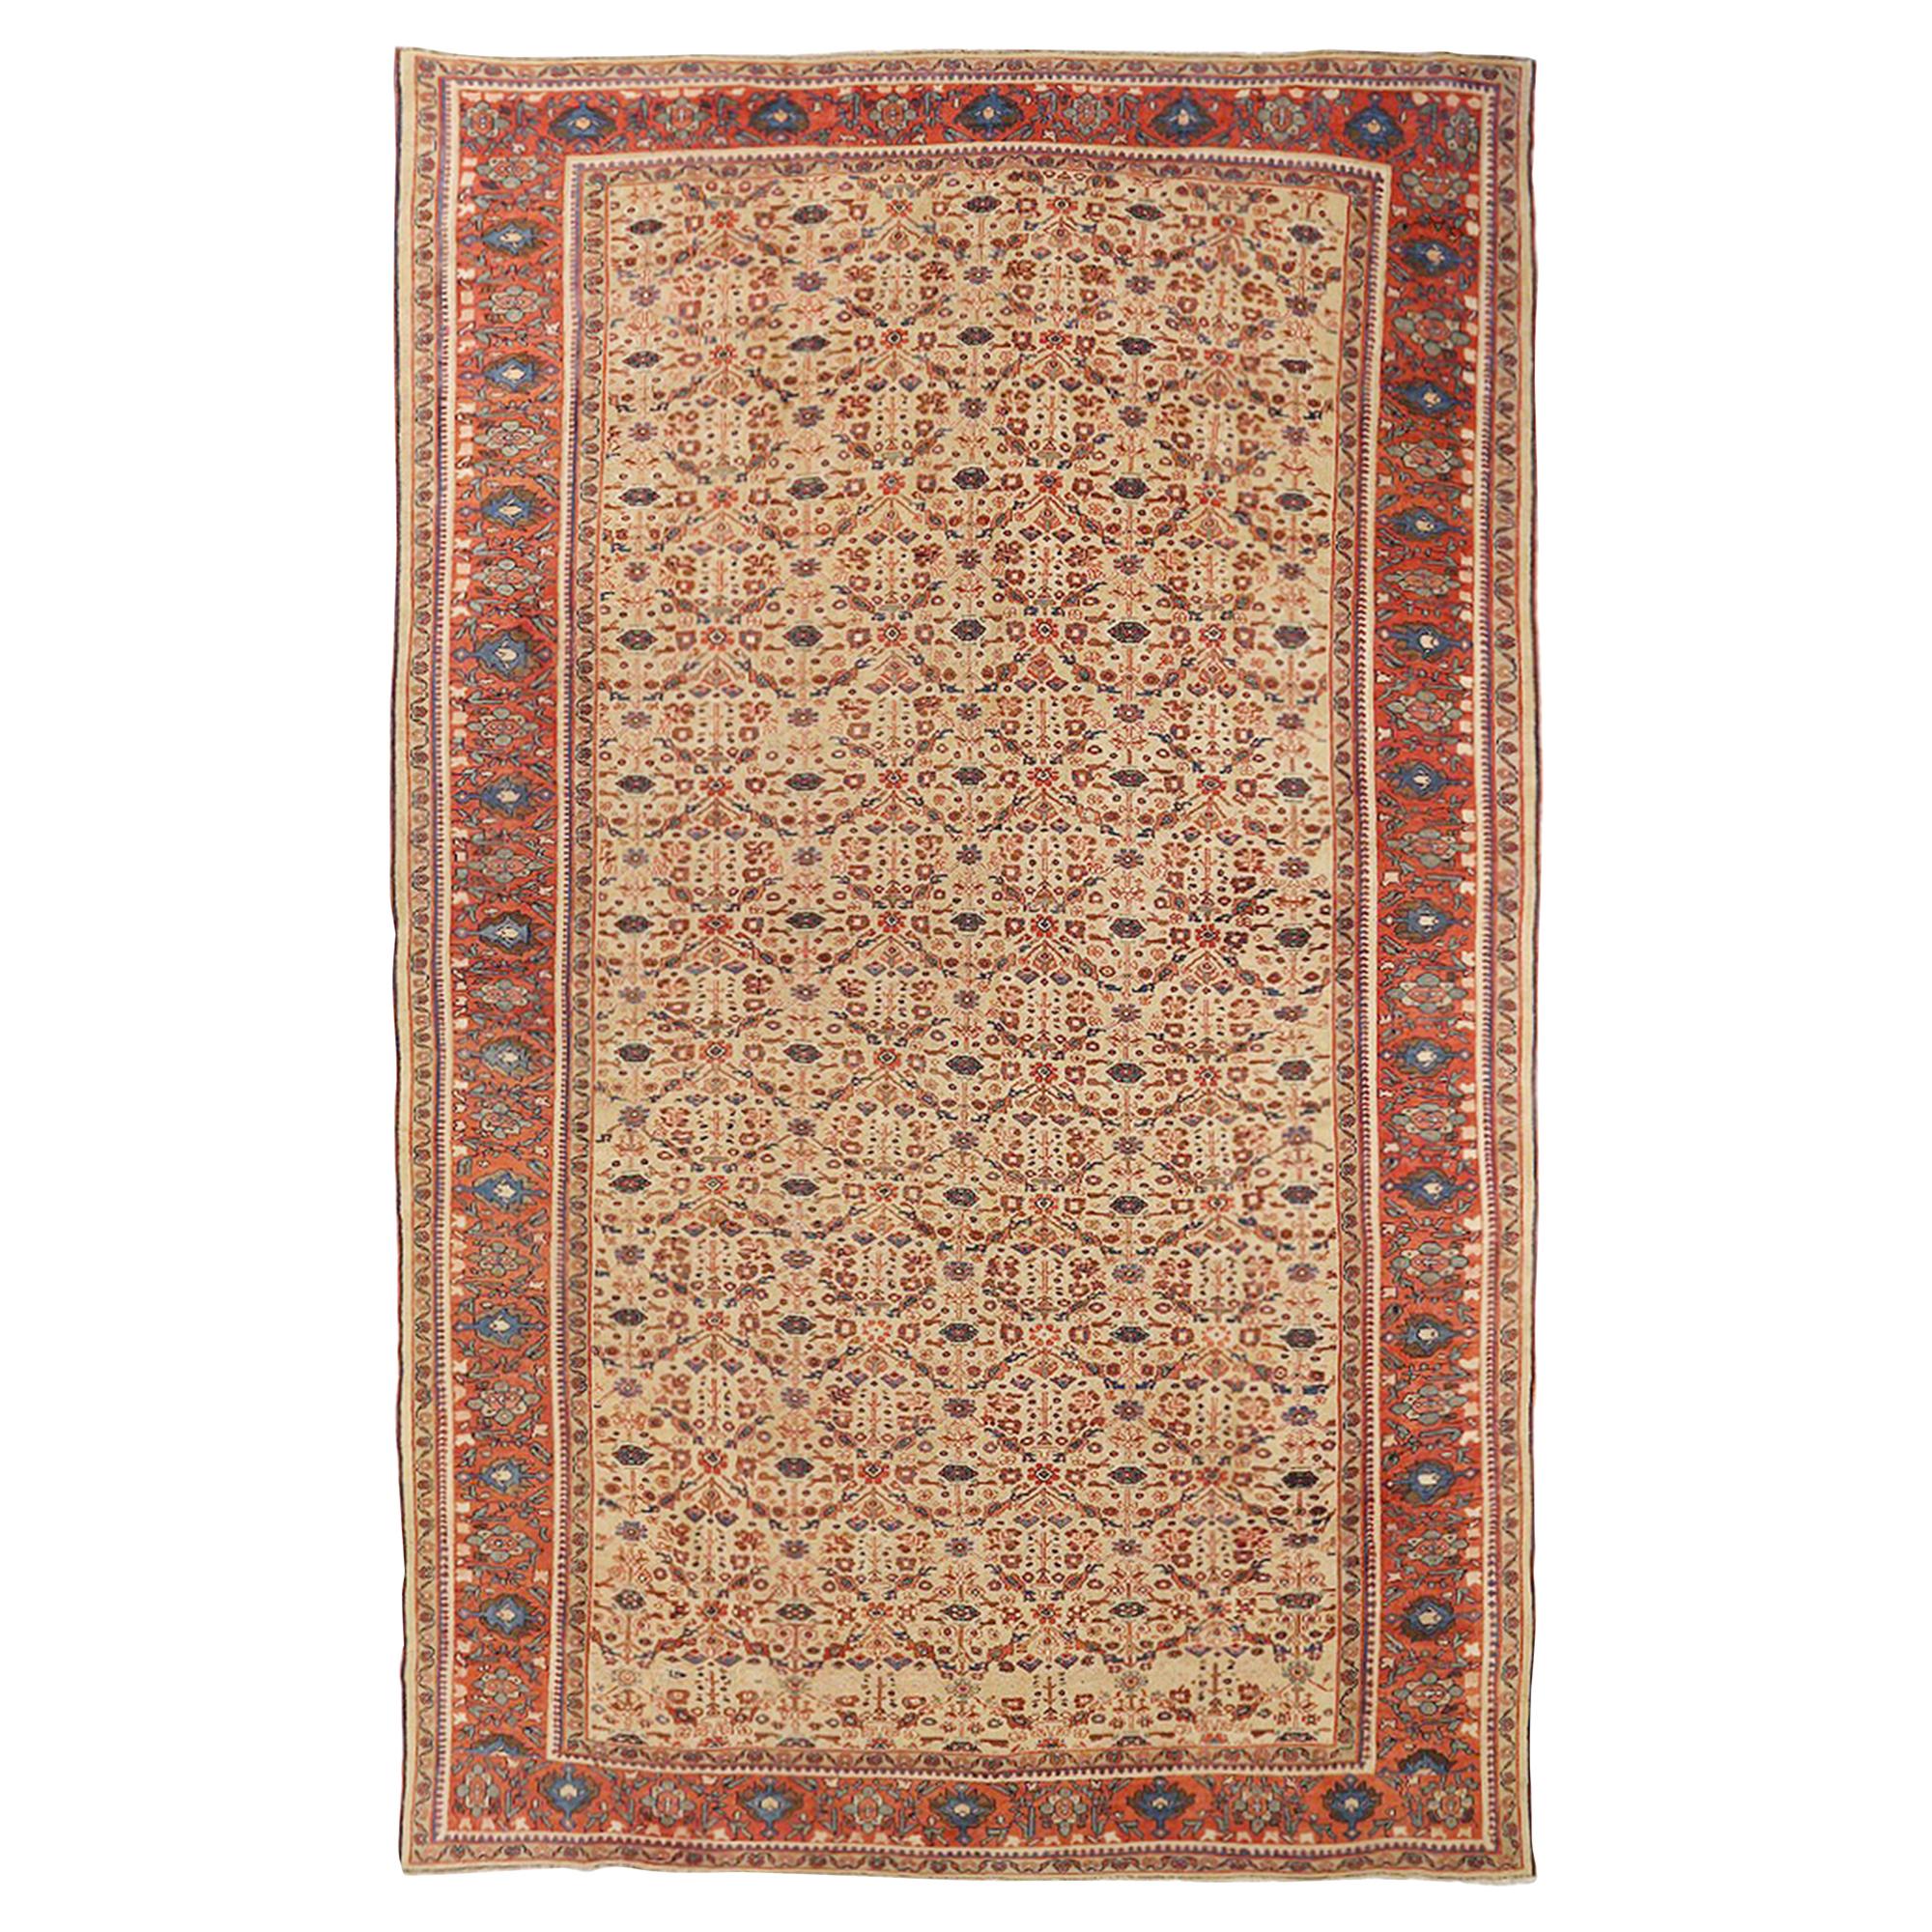 1910 Antique Persian Sultanabad Rug with Navy & Red Floral Motif on Ivory Field For Sale